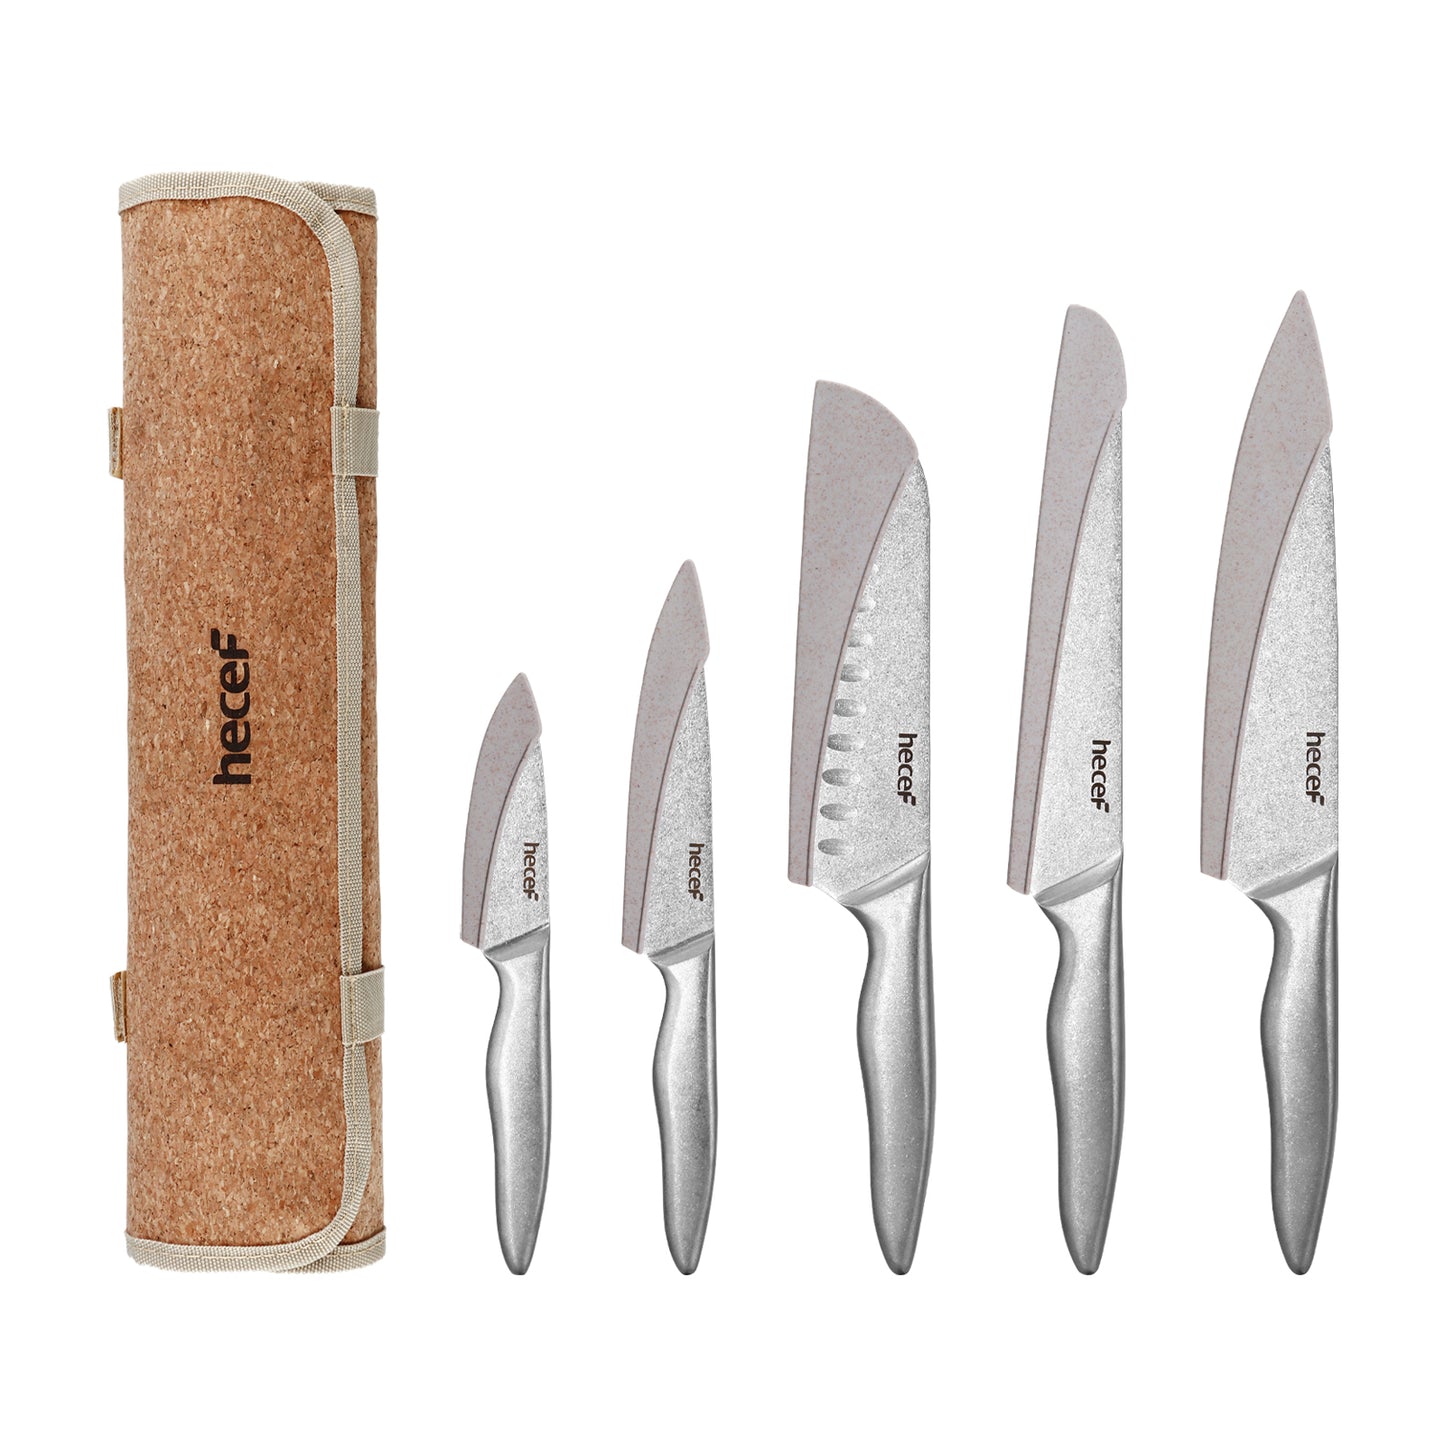 Hecef Kitchen Stonewashed Camping Knife Set of 6 with Sheaths & Roll - Hecef Kitchen